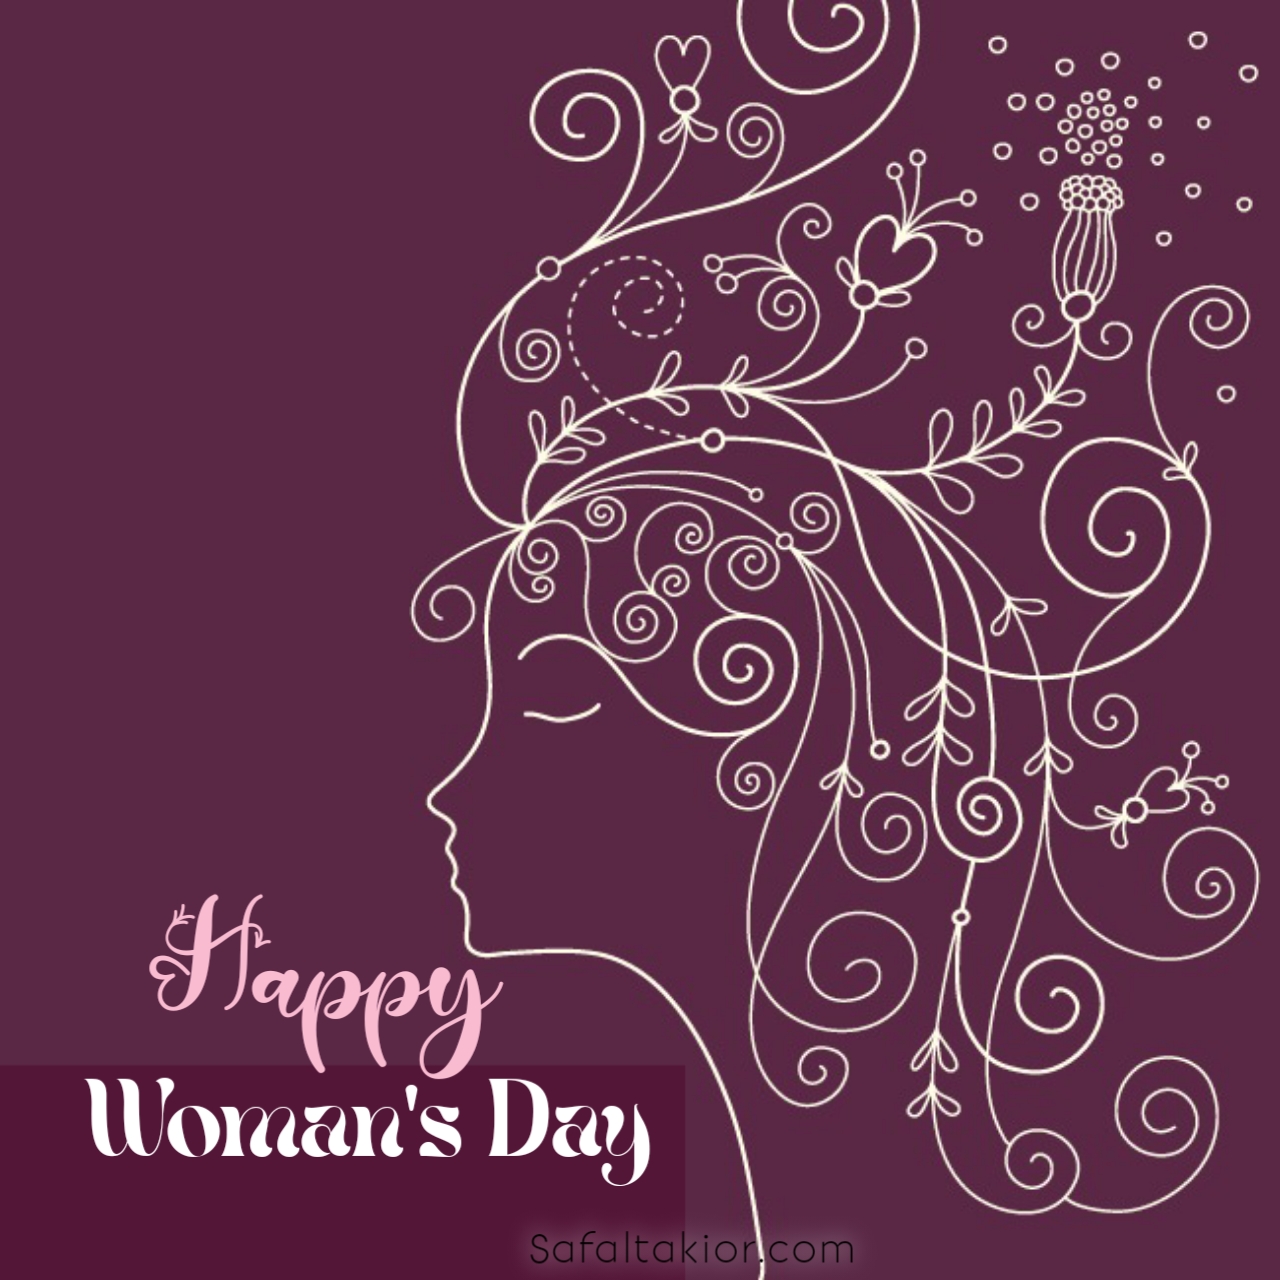 happy women's day wishes messages